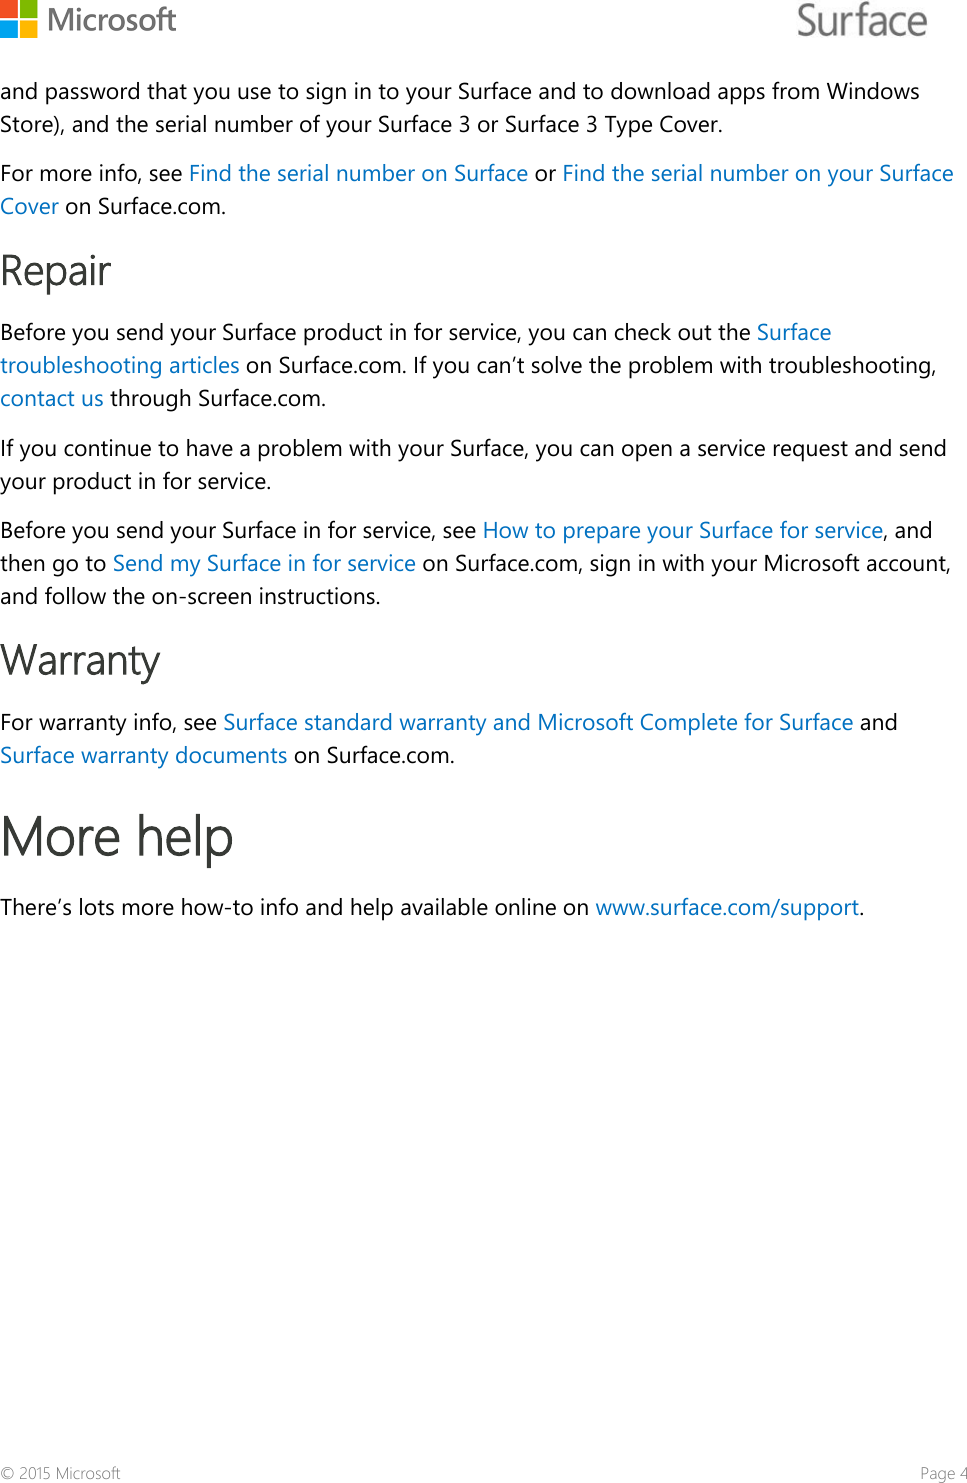    and password that you use to sign in to your Surface and to download apps from Windows Store), and the serial number of your Surface 3 or Surface 3 Type Cover.  For more info, see Find the serial number on Surface or Find the serial number on your Surface Cover on Surface.com.  Repair Before you send your Surface product in for service, you can check out the Surface troubleshooting articles on Surface.com. If you can’t solve the problem with troubleshooting, contact us through Surface.com. If you continue to have a problem with your Surface, you can open a service request and send your product in for service.  Before you send your Surface in for service, see How to prepare your Surface for service, and then go to Send my Surface in for service on Surface.com, sign in with your Microsoft account, and follow the on-screen instructions.  Warranty For warranty info, see Surface standard warranty and Microsoft Complete for Surface and Surface warranty documents on Surface.com.  More help  There’s lots more how-to info and help available online on www.surface.com/support.  © 2015 Microsoft    Page 41 